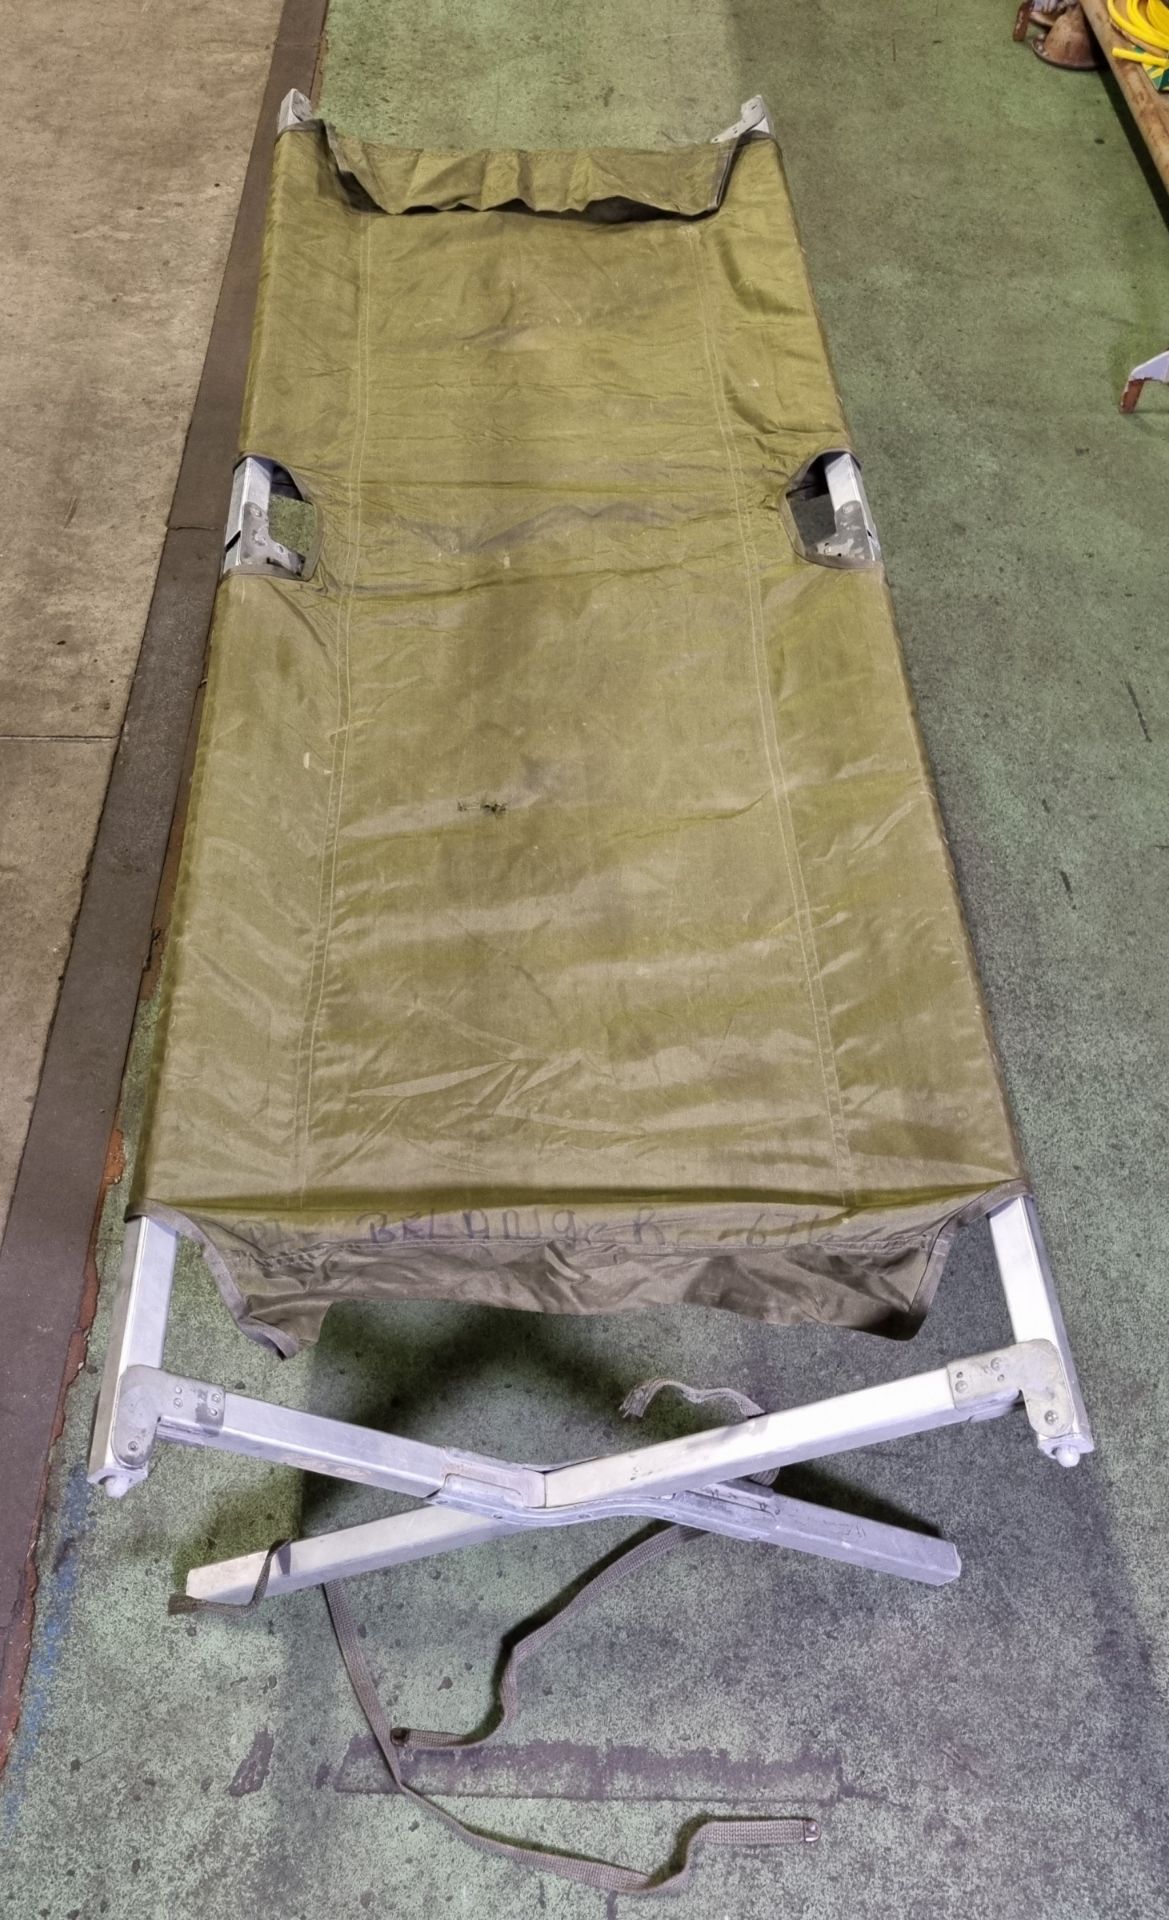 7x folding field cots - L 1900 x W 700 x H 450mm - NO END BARS - Image 3 of 6